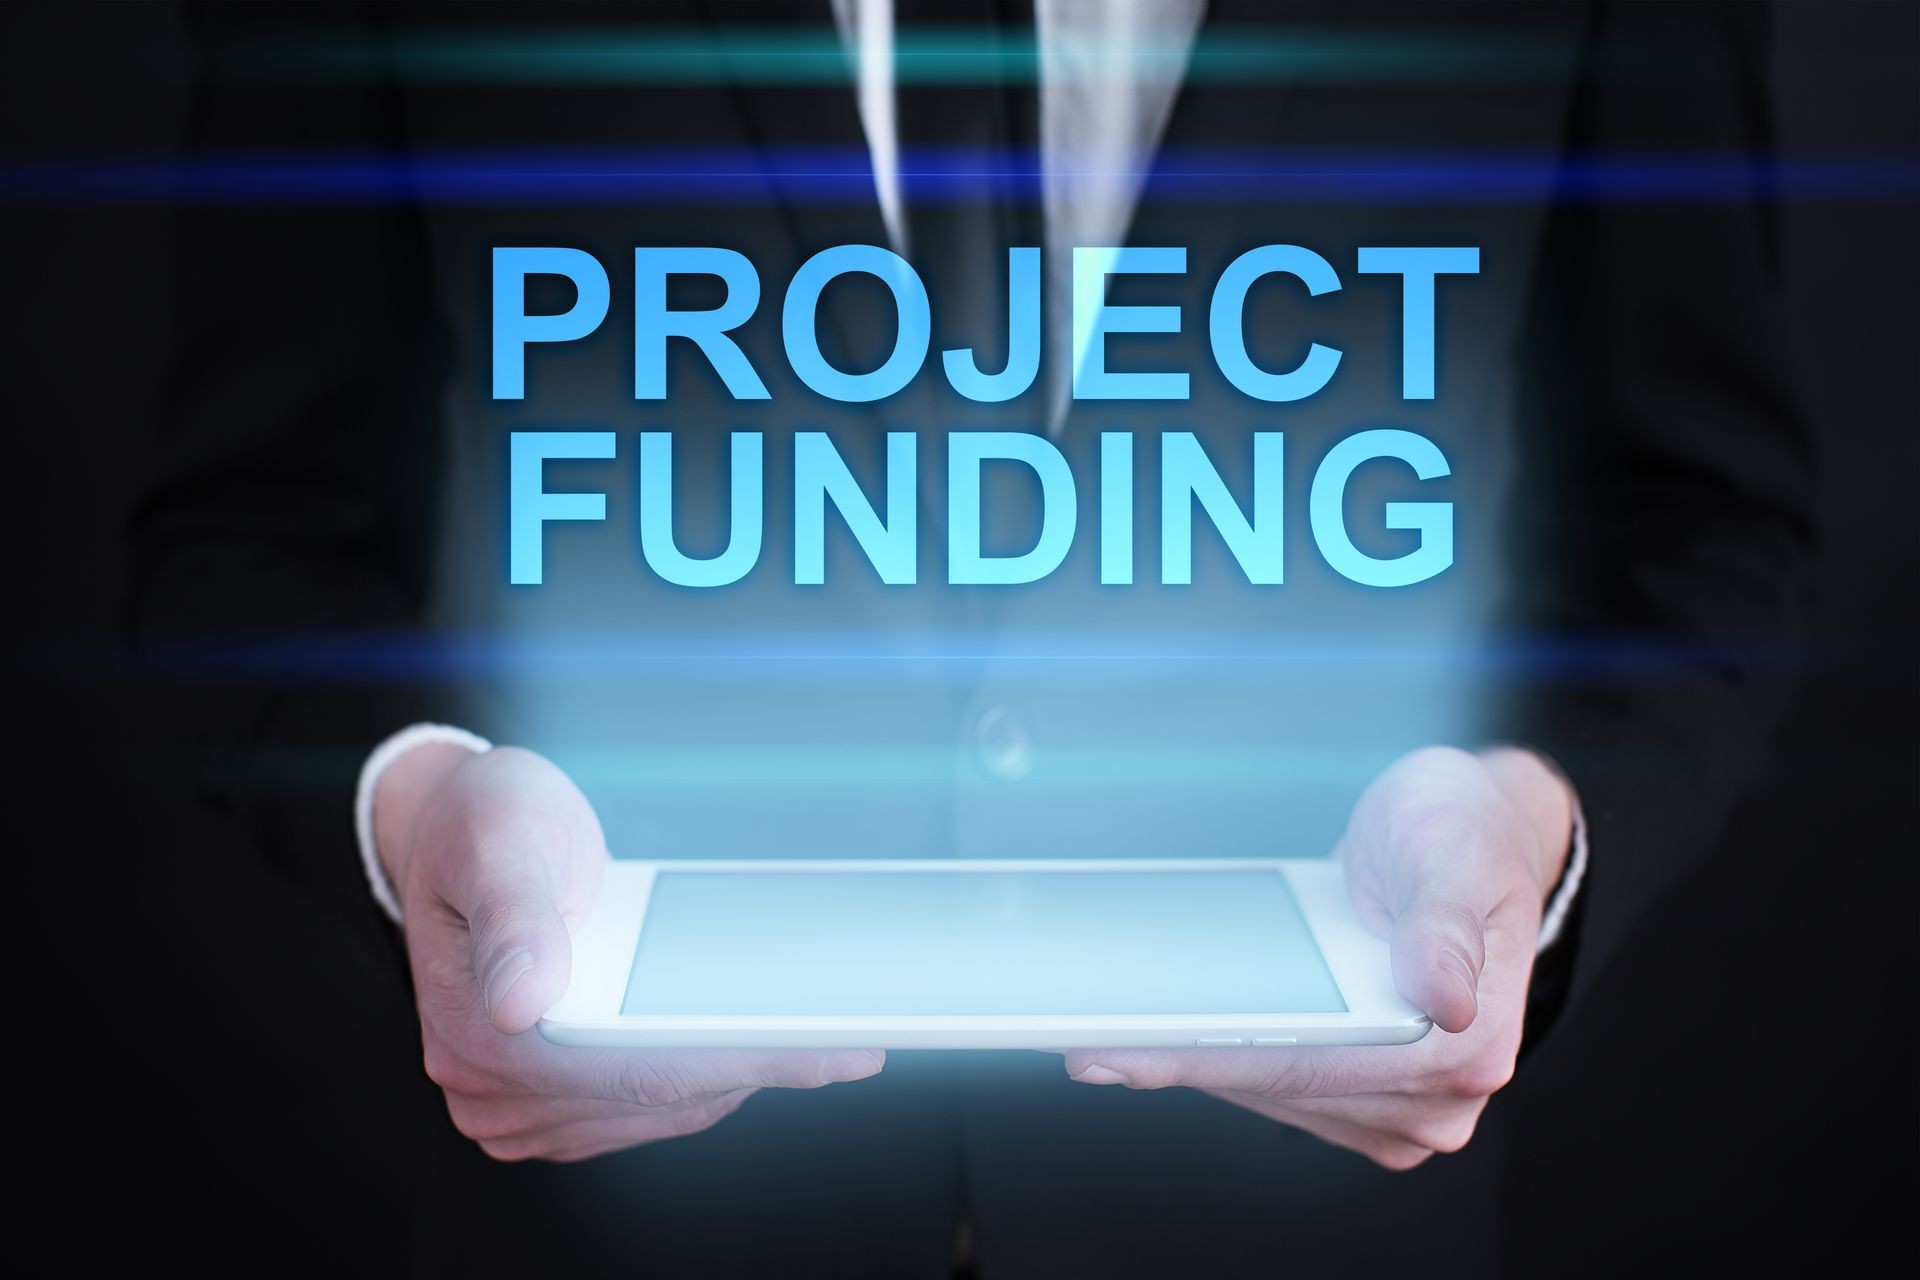 Businessman holding a tablet pc with "Project funding" text on virtual screen. Internet concept. Business concept.